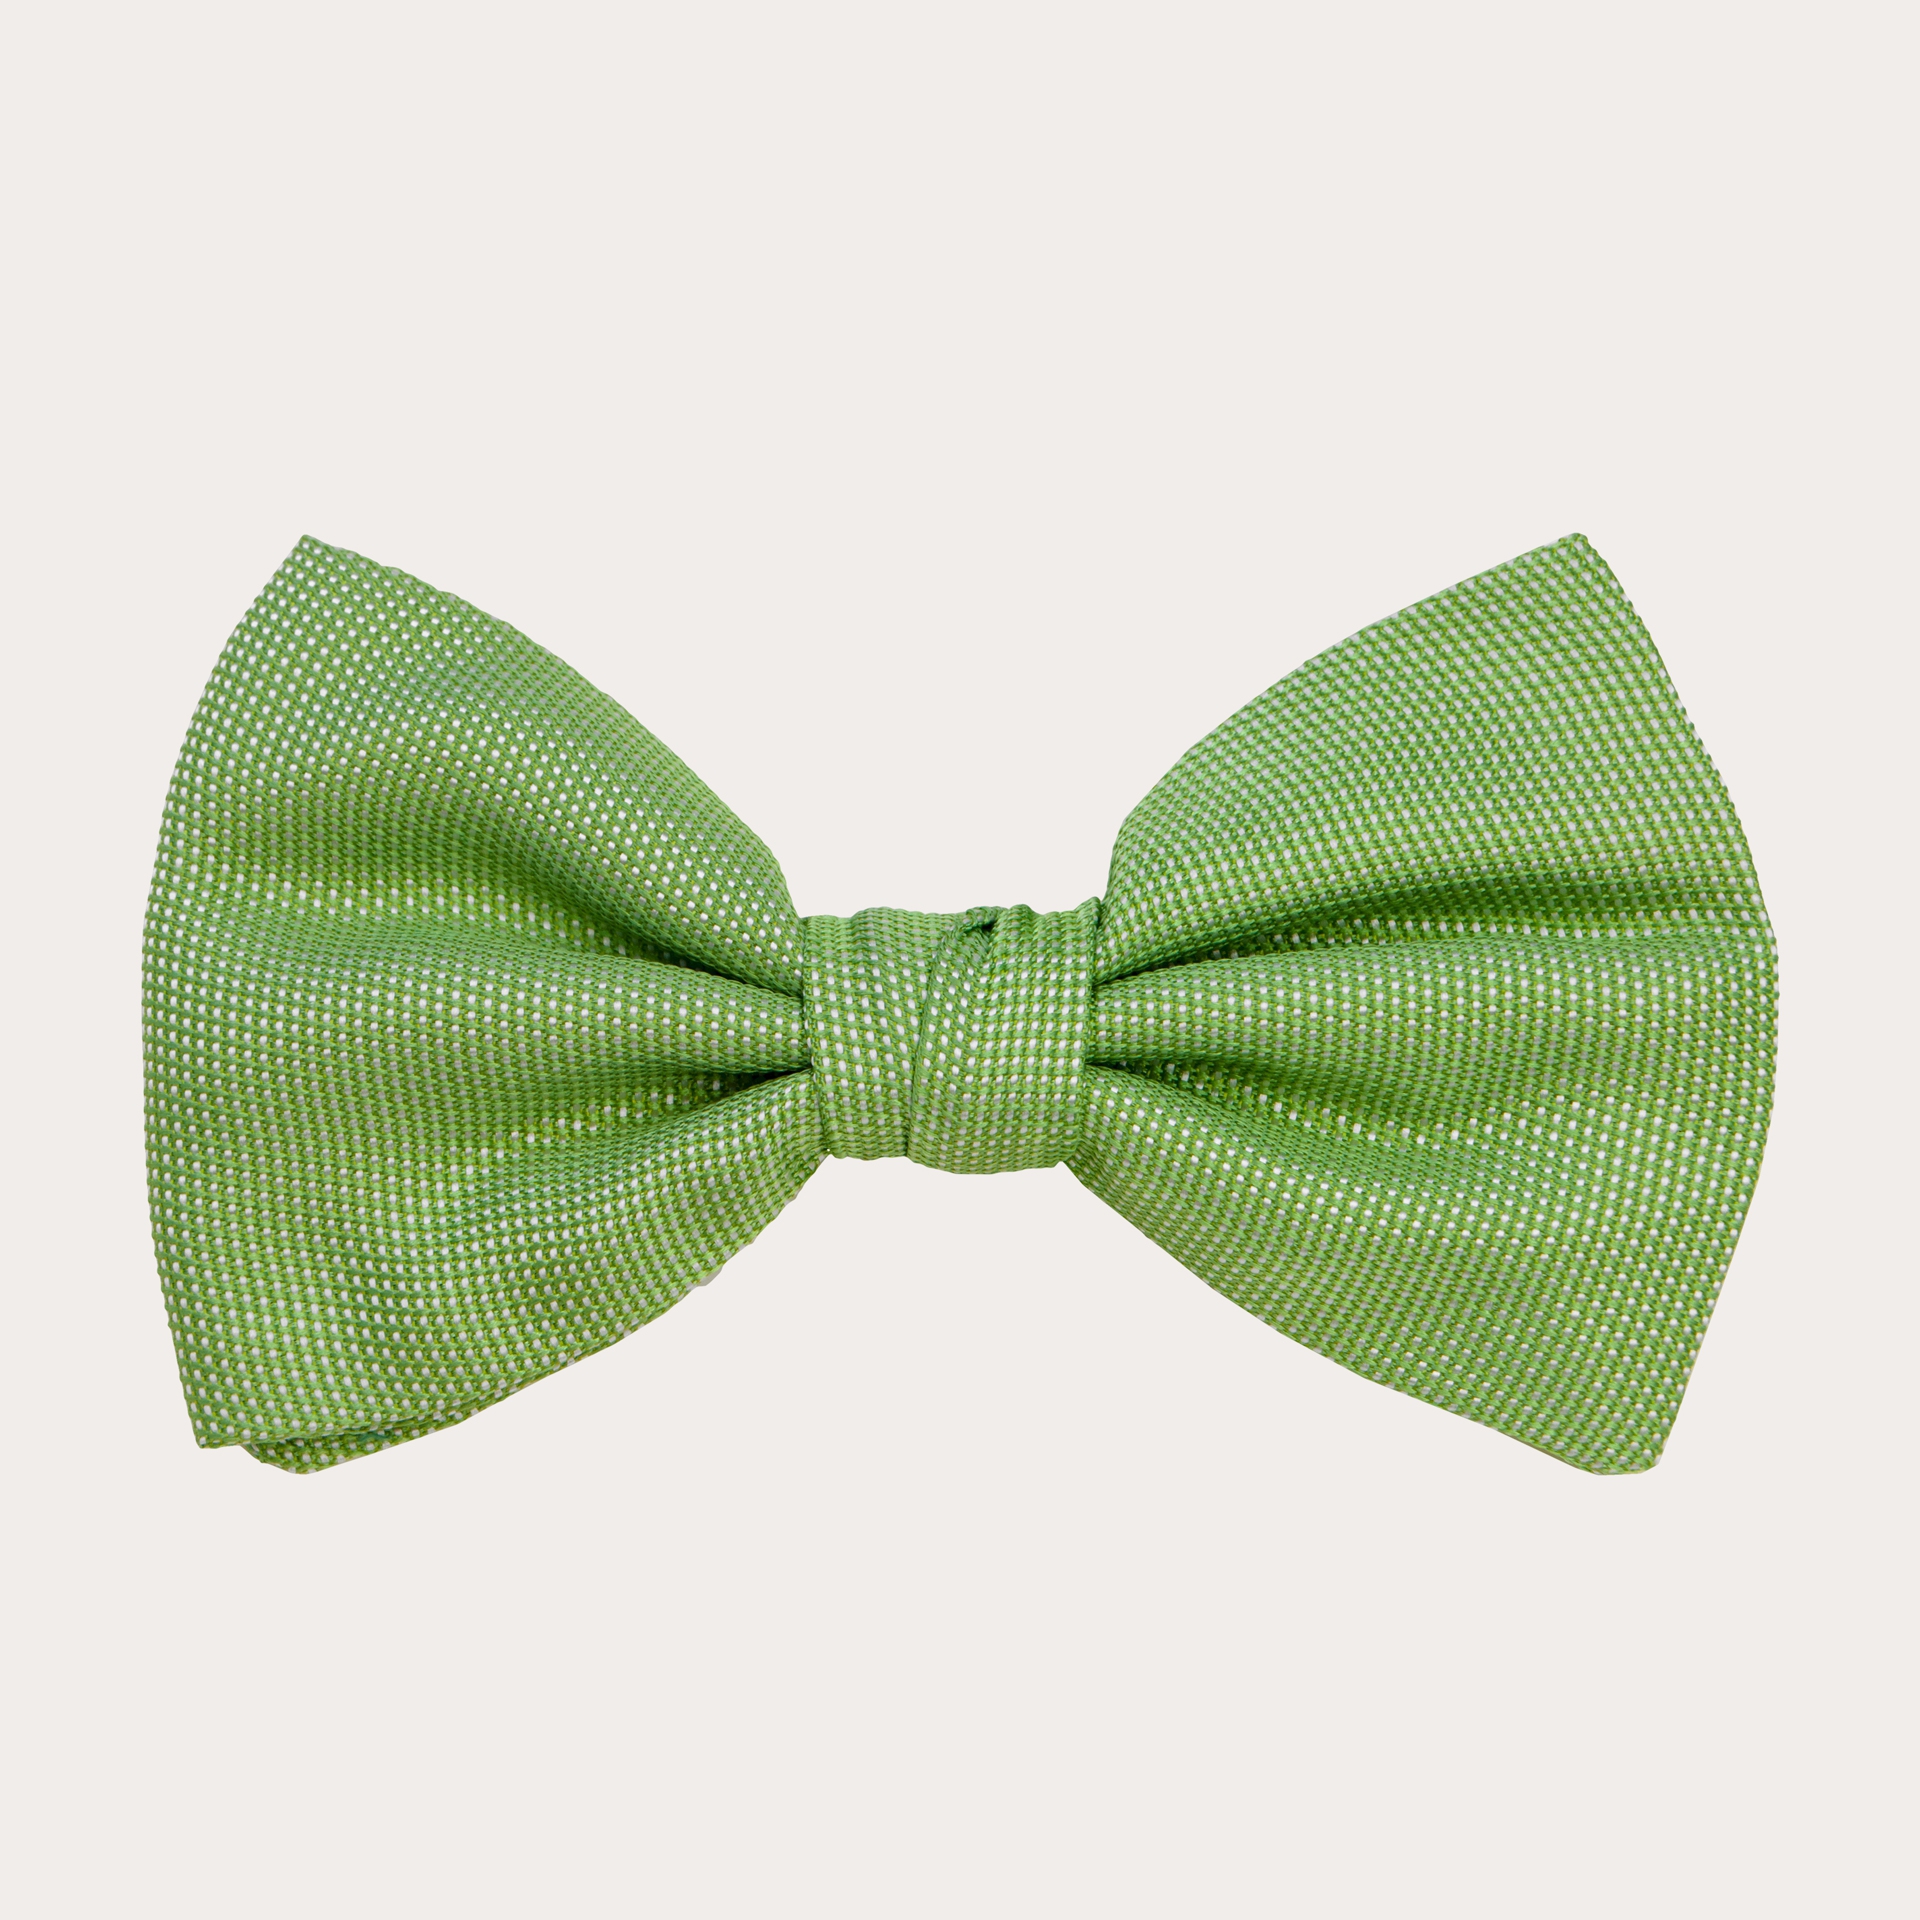 BRUCLE Refined bow tie in light green jacquard silk